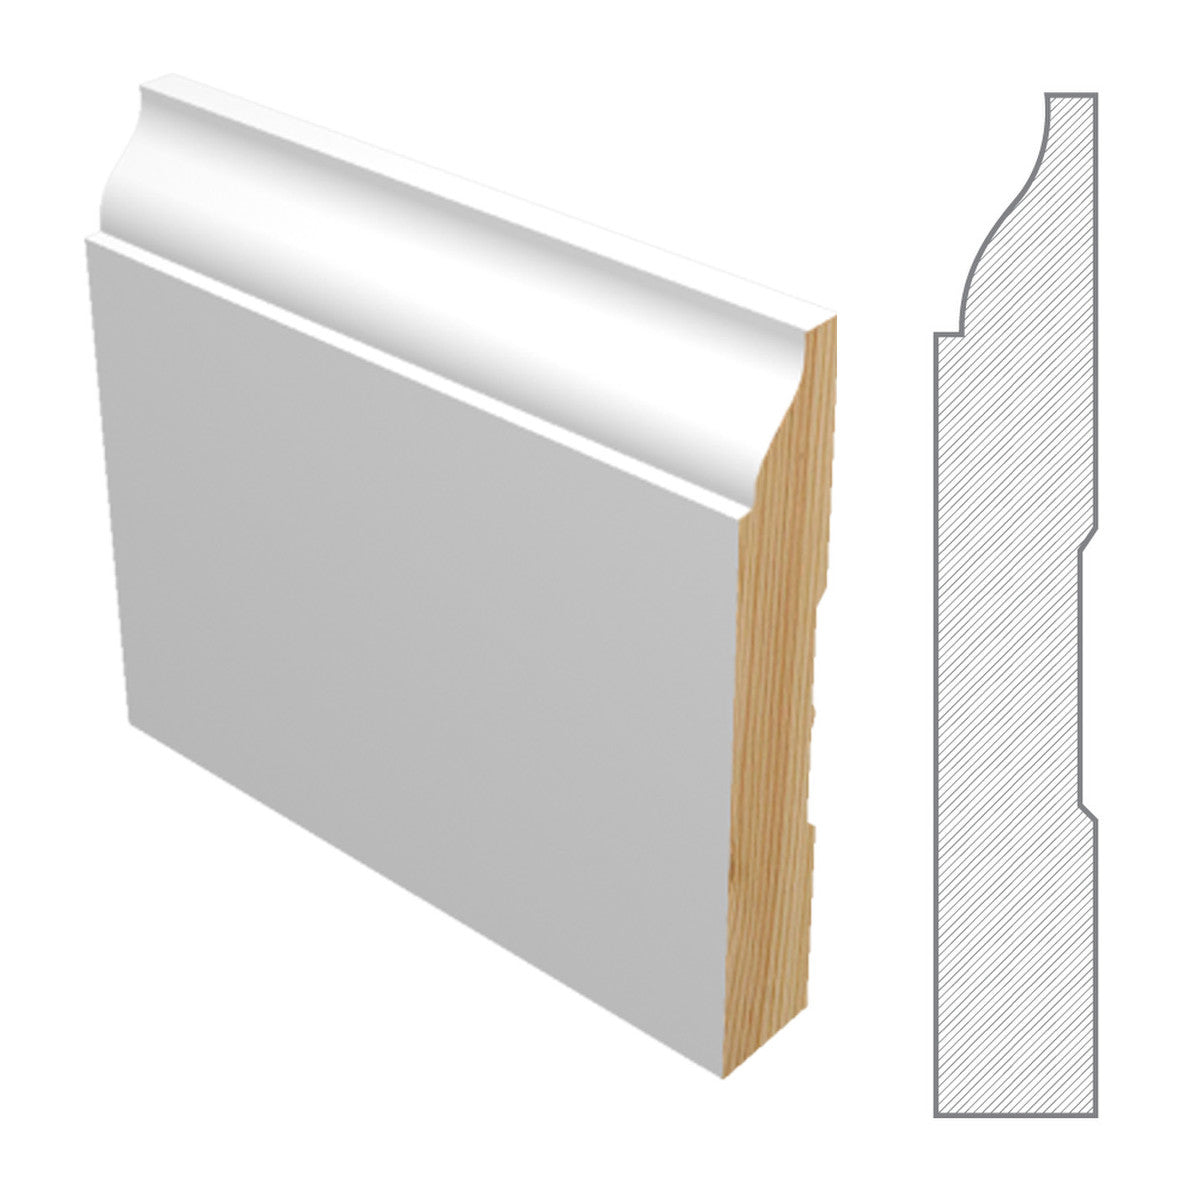 623 Baseboard Pine Primed | 3.25" Tall x 9/16" Thick x 16' LF Long